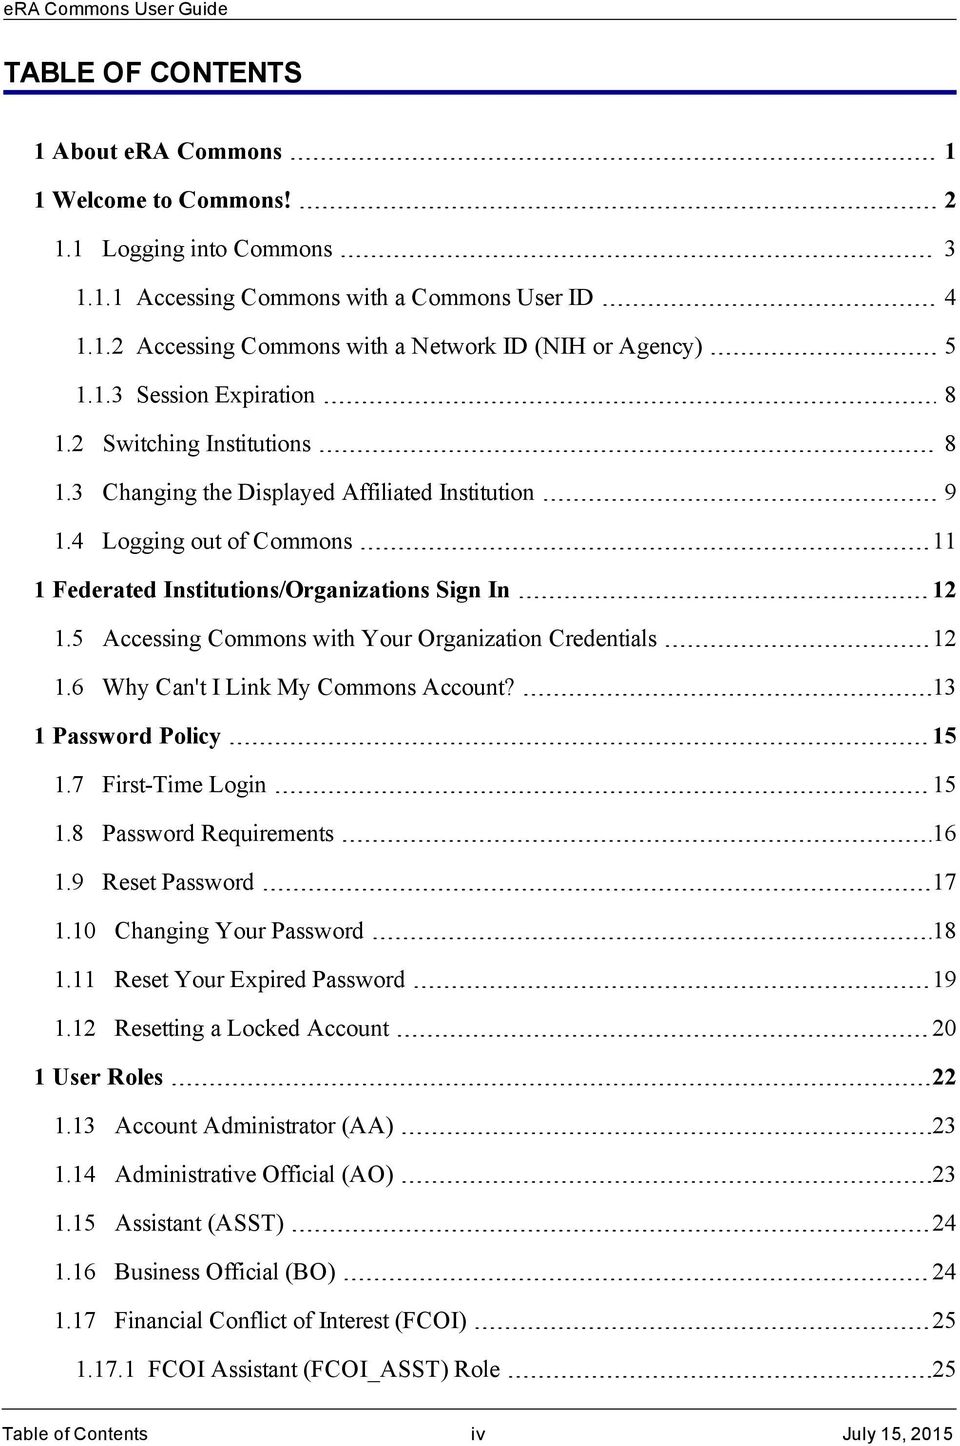 5 Accessing Commons with Your Organization Credentials 12 1.6 Why Can't I Link My Commons Account? 13 1 Password Policy 15 1.7 First-Time Login 15 1.8 Password Requirements 16 1.9 Reset Password 17 1.